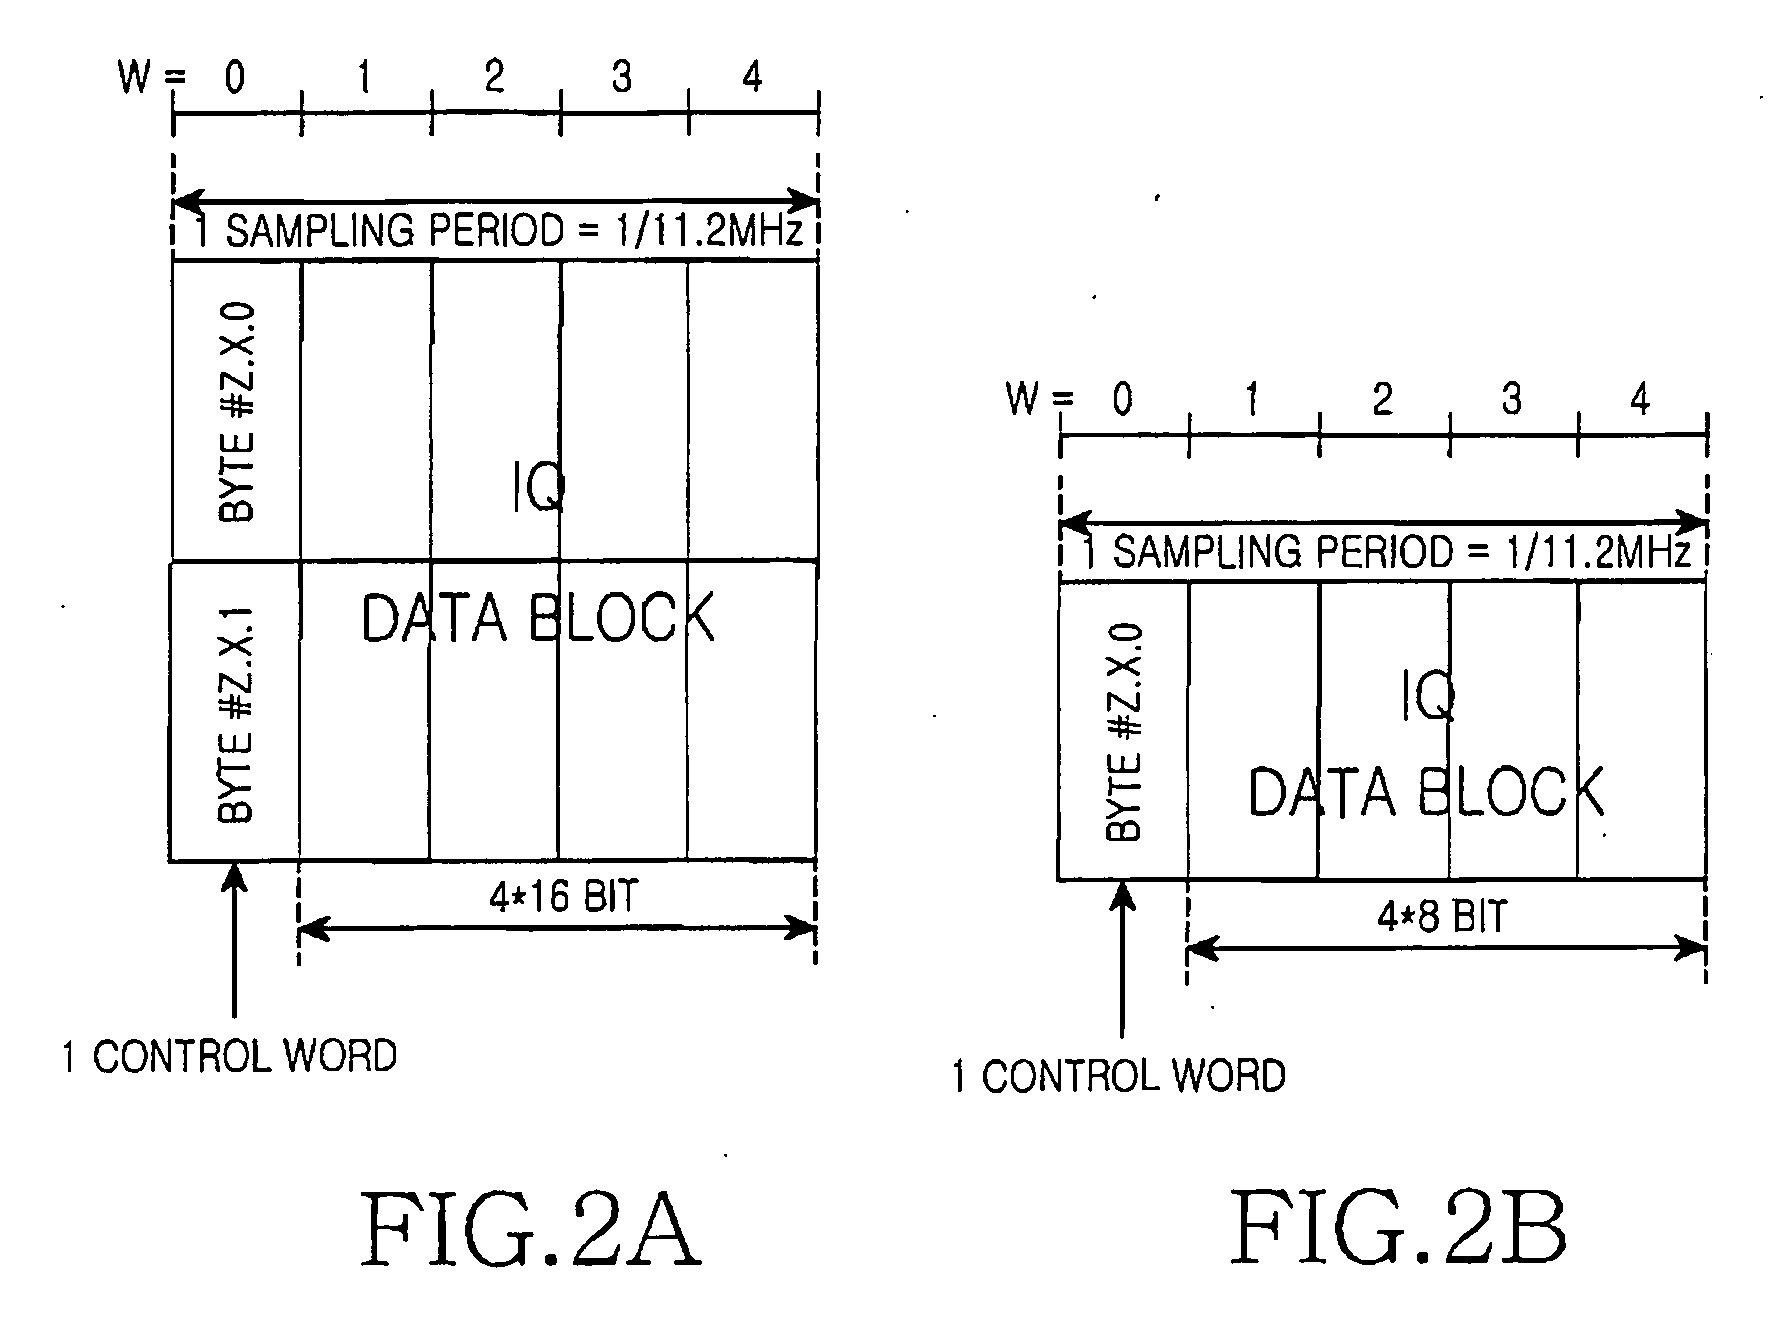 Apparatus and method for communication between a digital unit and a remote RF unit in a broadband wireless communication system